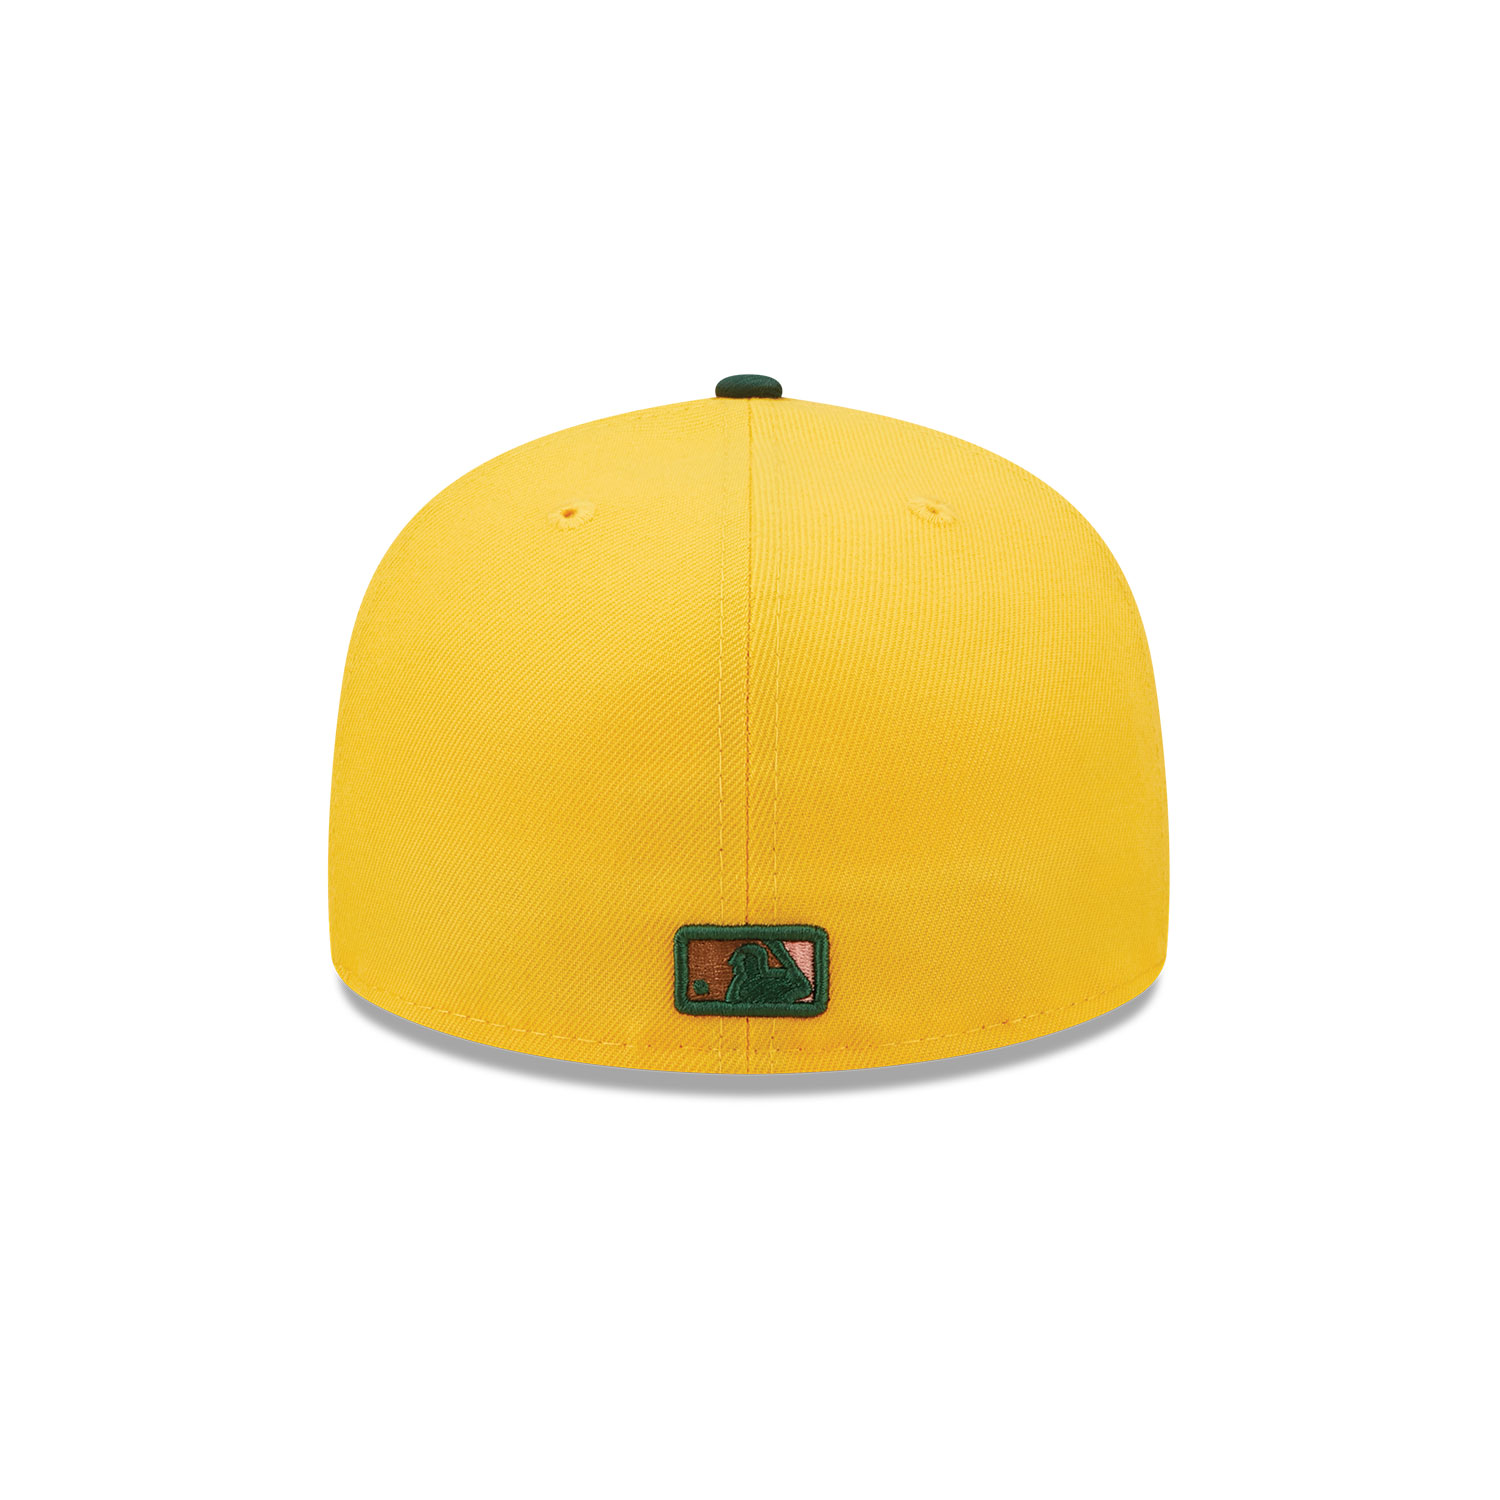 New York Mets Back to School Yellow 59FIFTY Fitted Cap